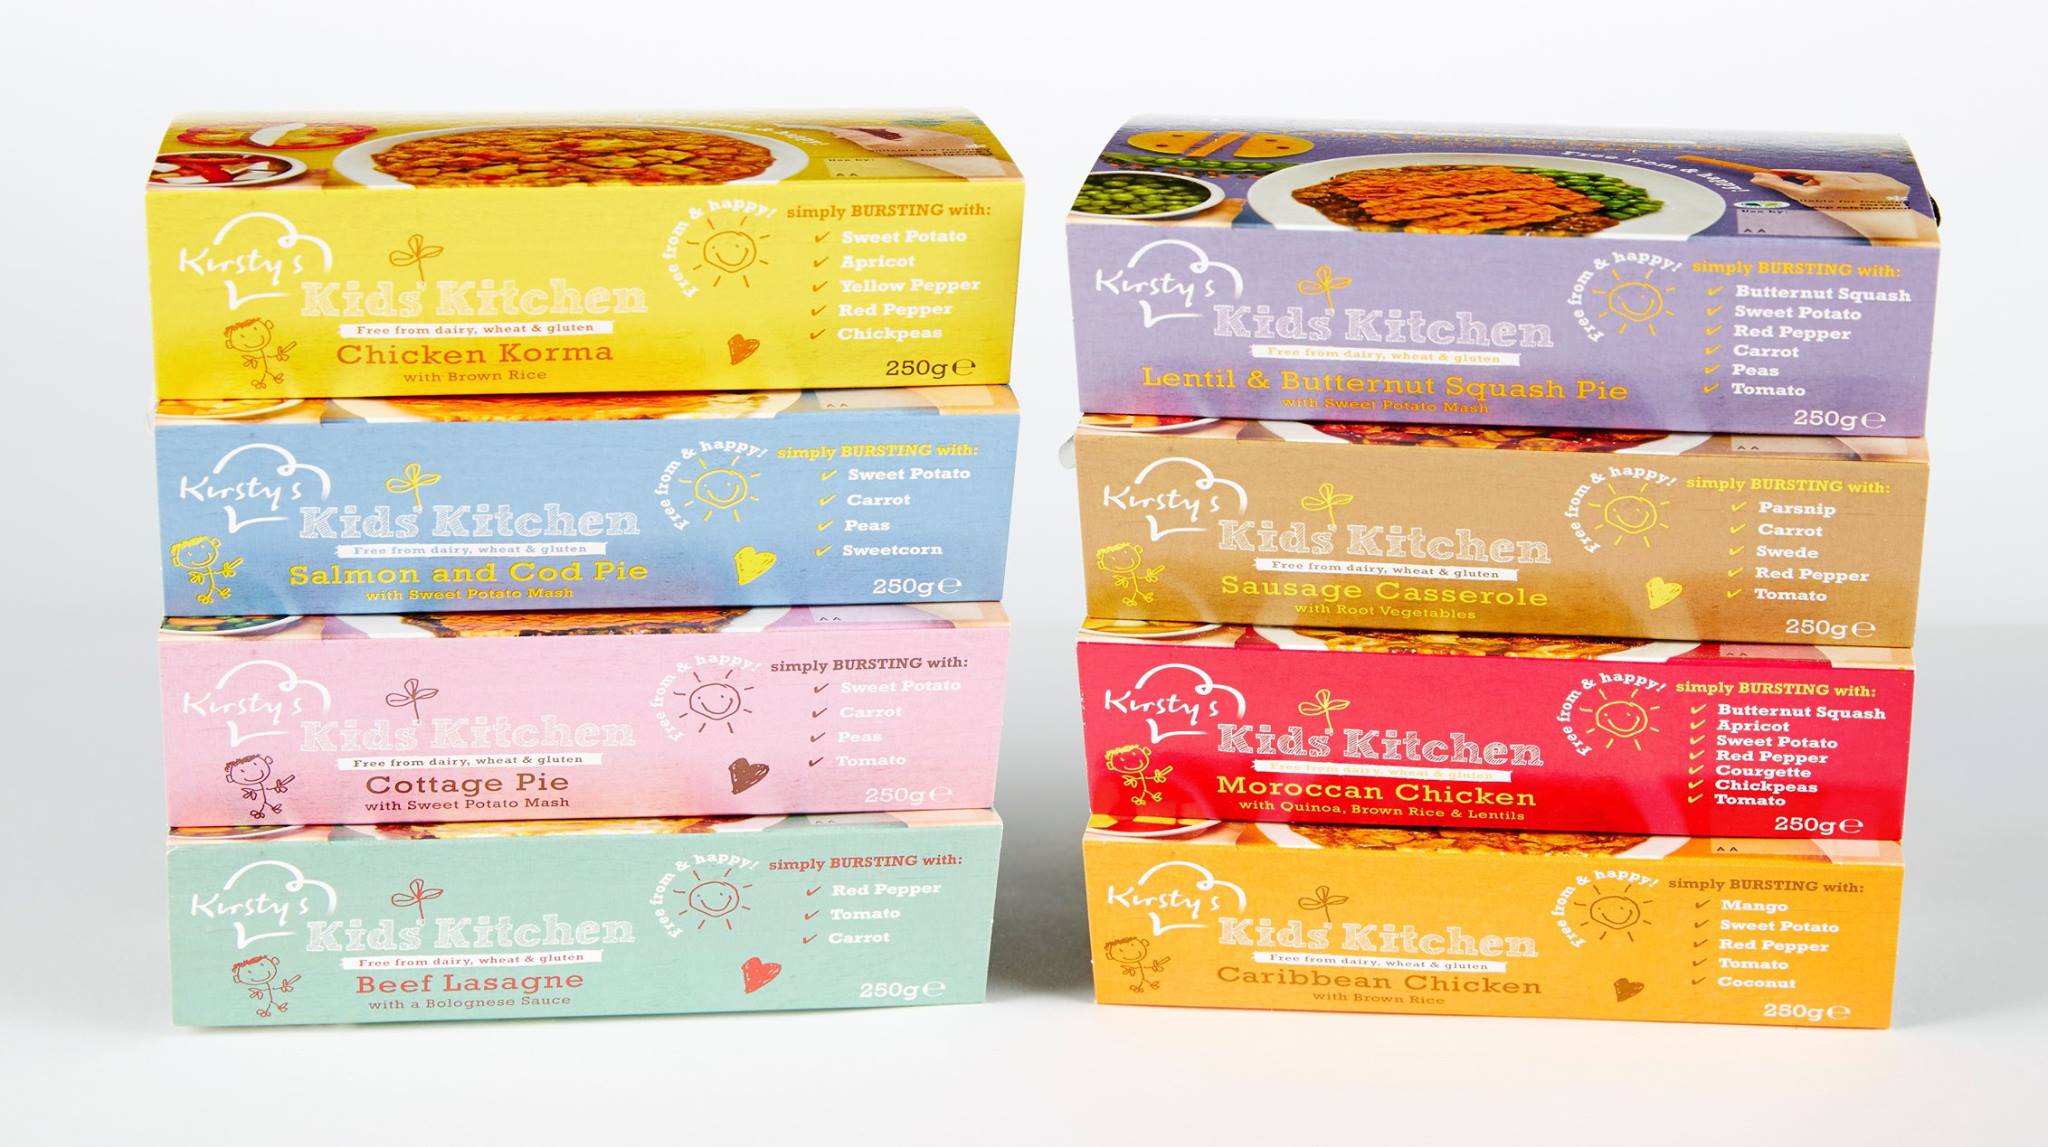 Kirsty's 'Kids' Kitchen' range to be rolled out across Morrison's stores